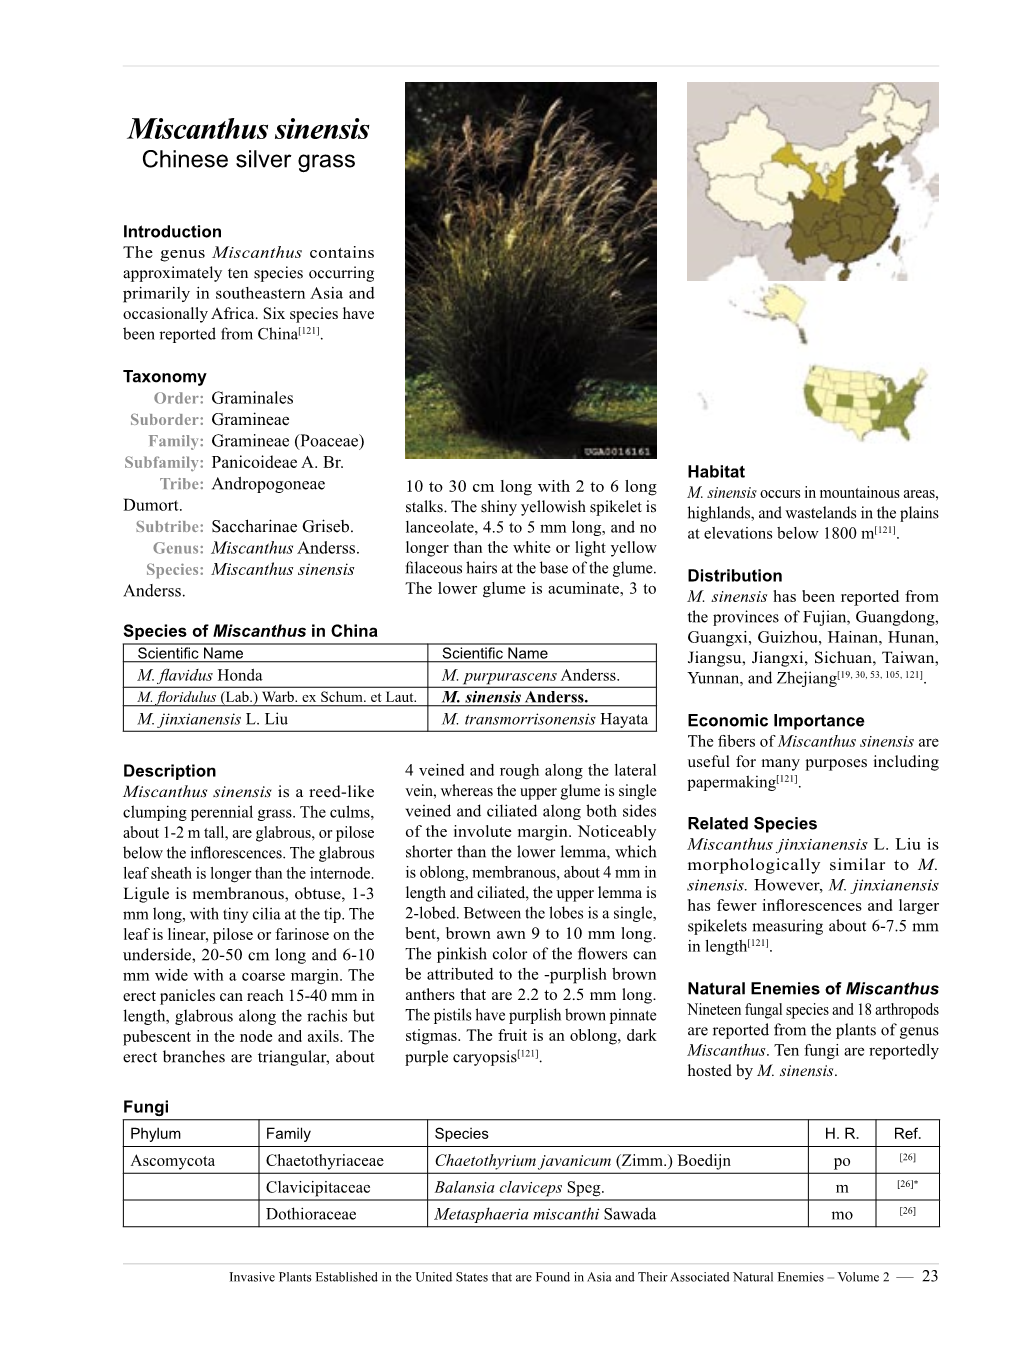 Invasive Plants Established in the United States That Are Found in Asia and Their Associated Natural Enemies – Volume 2 — 23 Phylum Family Species H